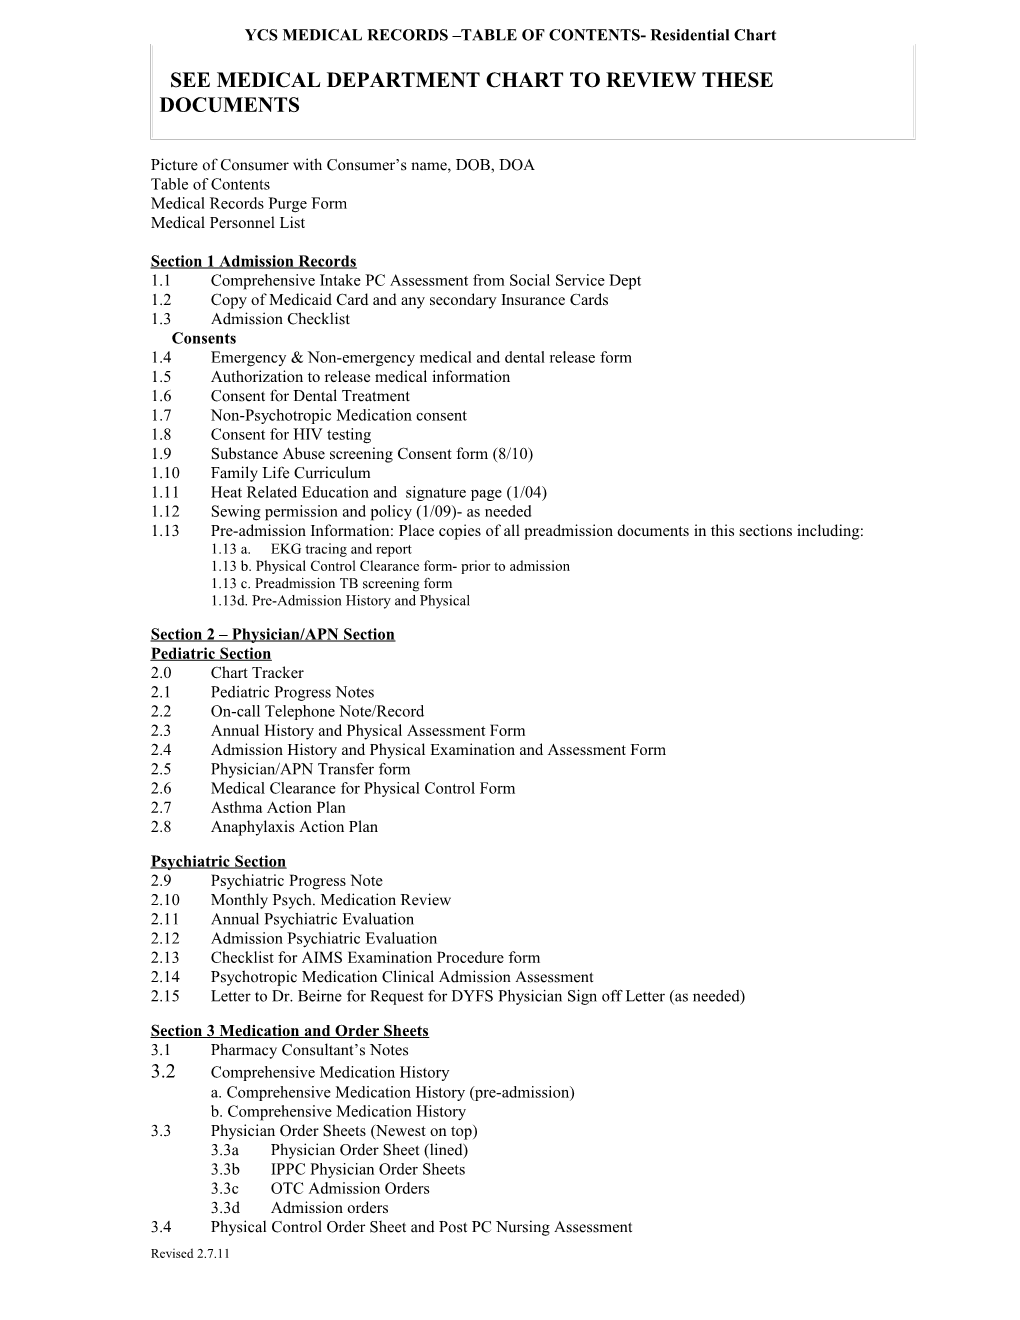 YCS MEDICAL RECORDS TABLE of CONTENTS- Residential Chart